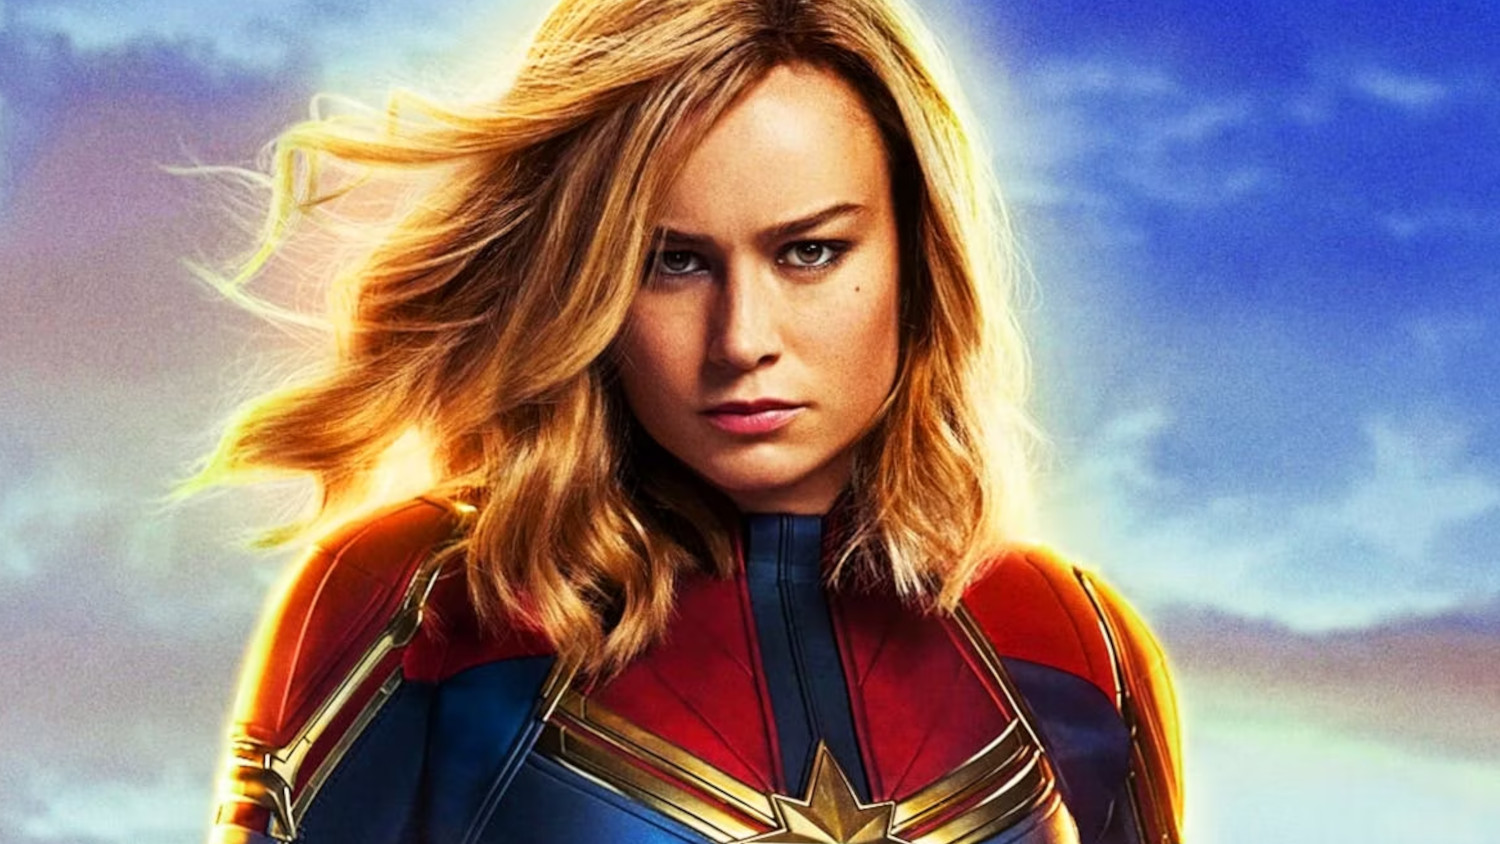 Brie Larson Says She’s A Superhero Mentor; Been Told She’s ‘The most powerful blah, blah, blah’